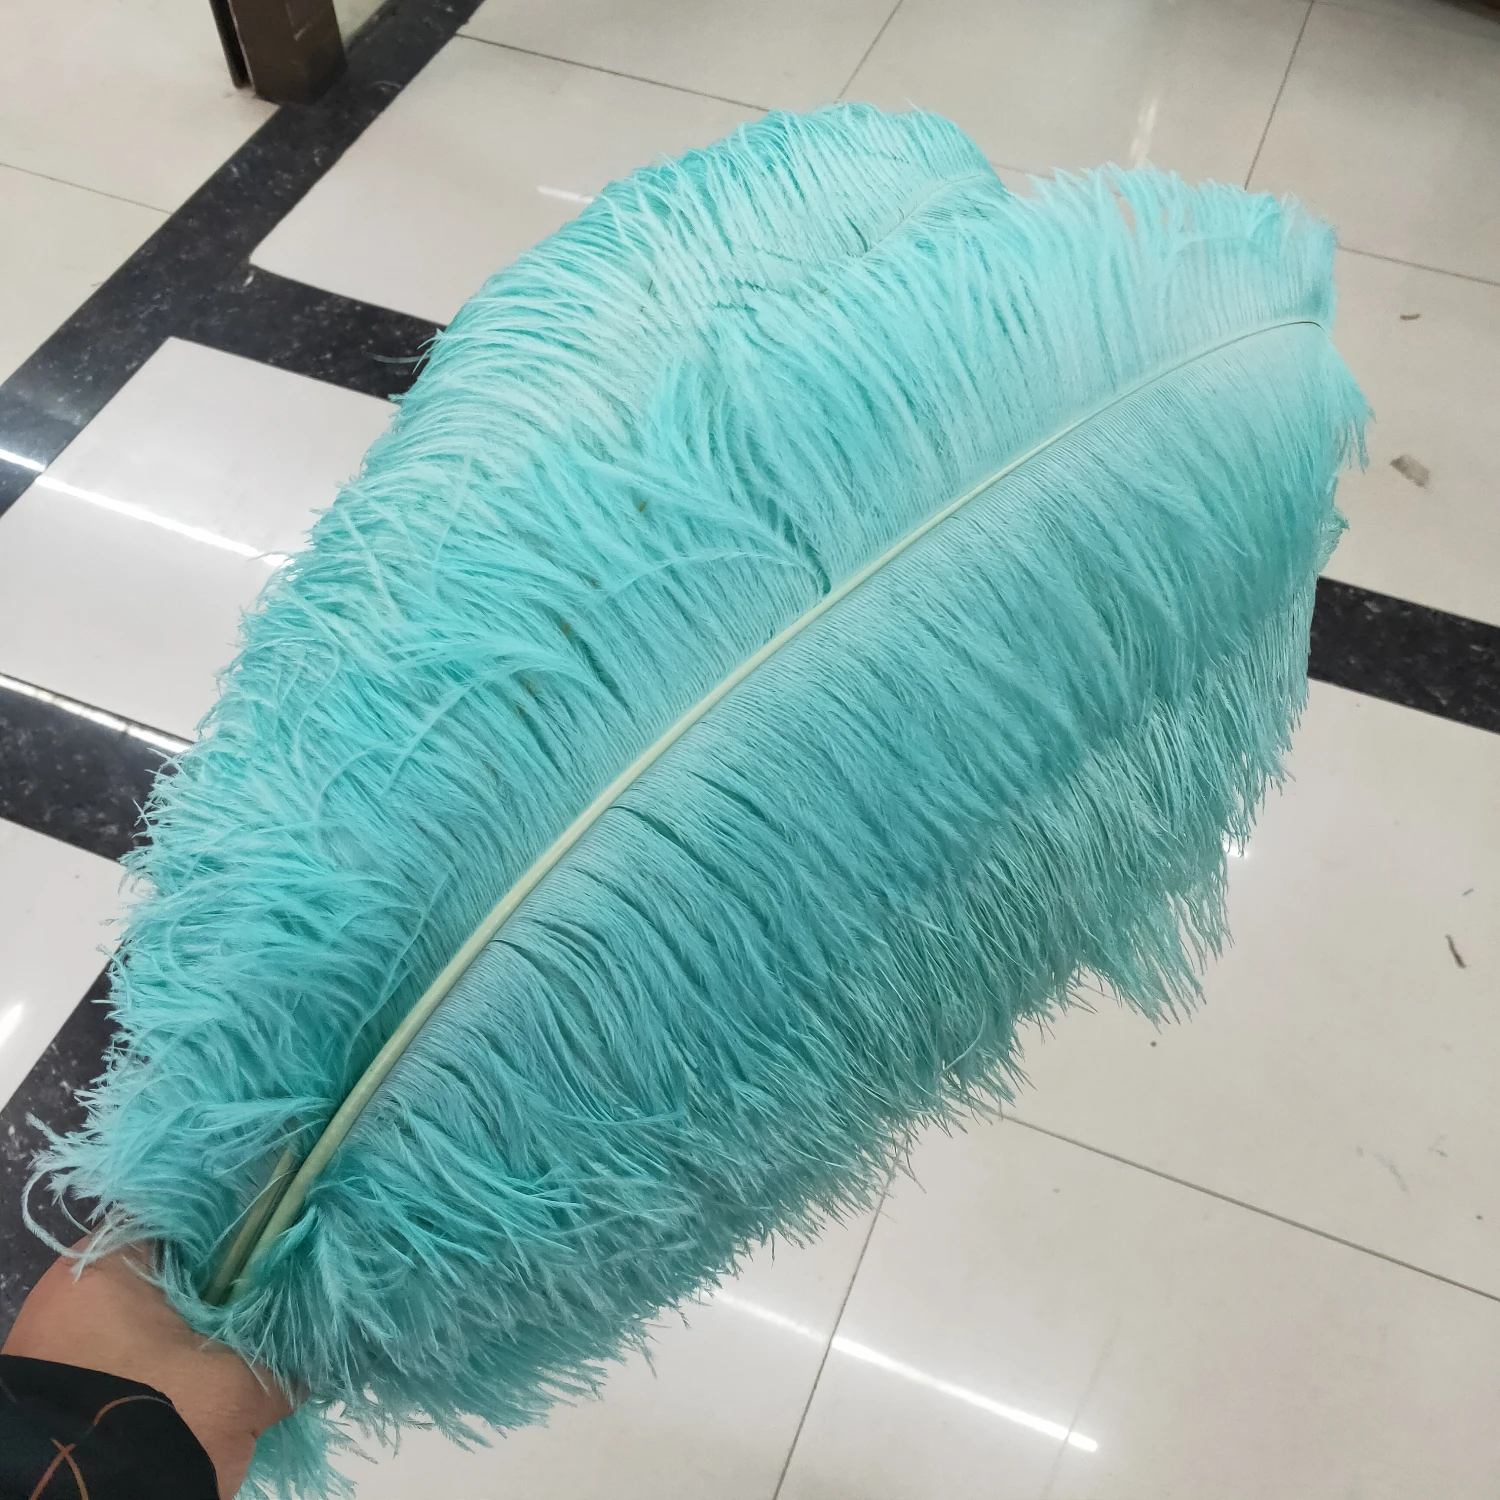 

100 Pcs/lot High Quality Mint Green Ostrich Feather 65-70cm Feathers Carnival Costumes Party Home Wedding Decorations Plume